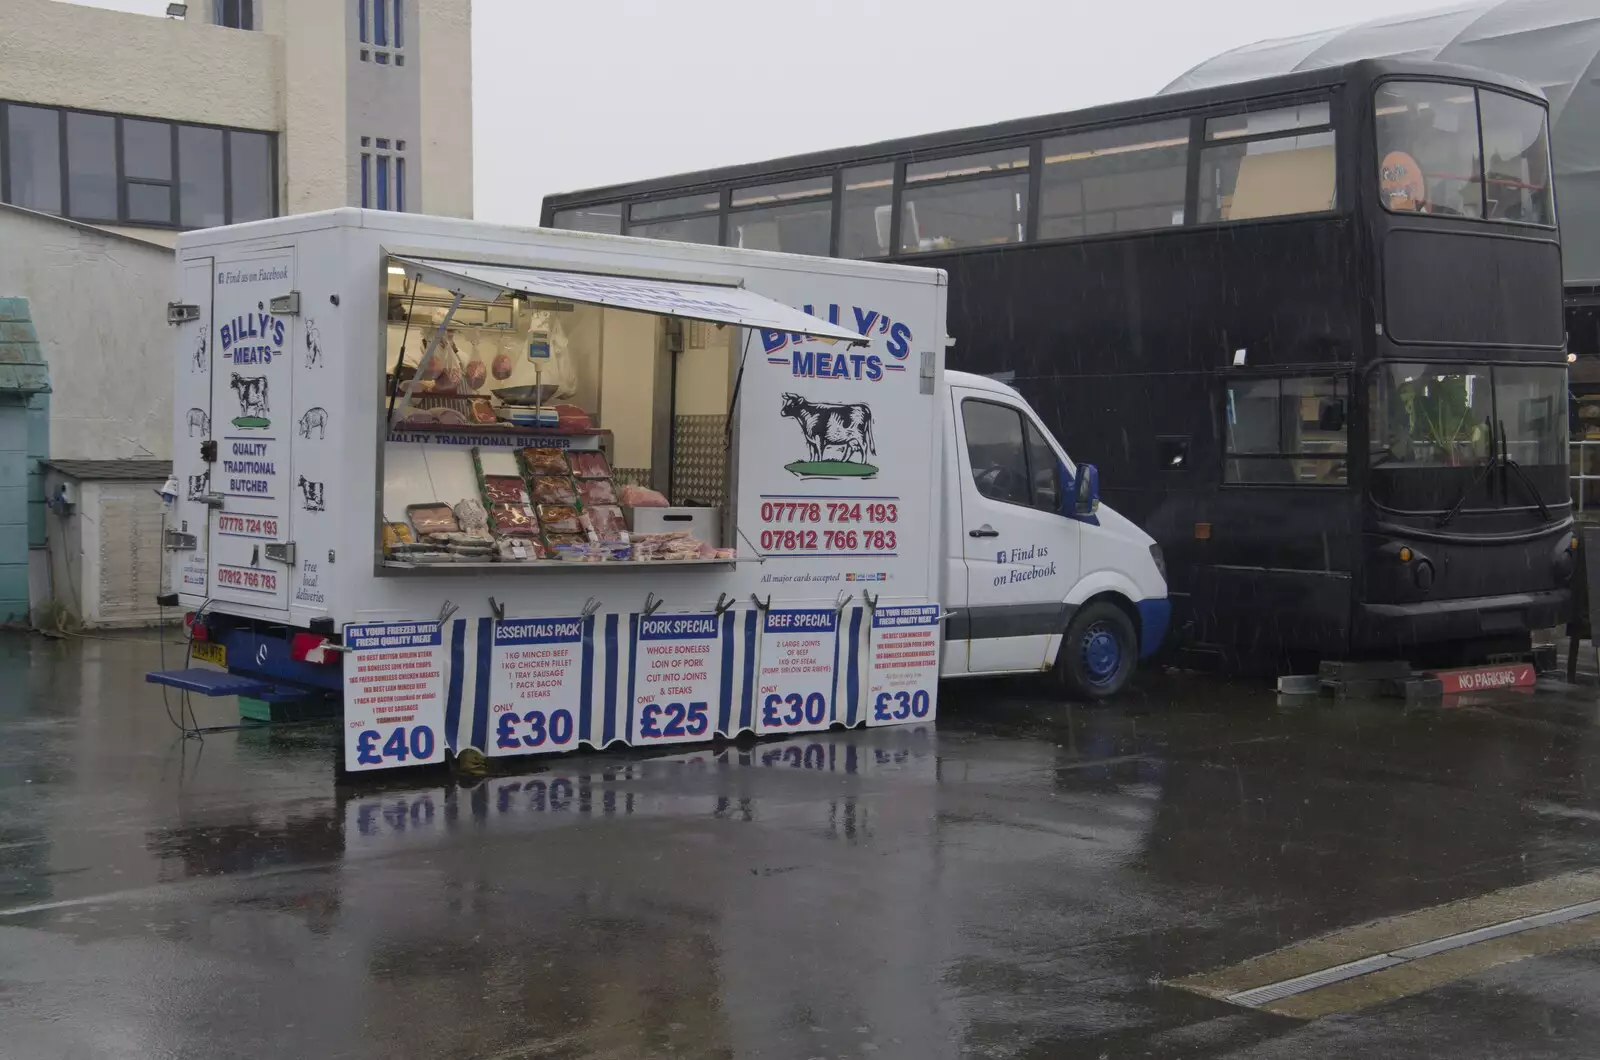 The Billy's Meats van isn't doing much trade, from Felixstowe in the Rain, Suffolk - 10th March 2024